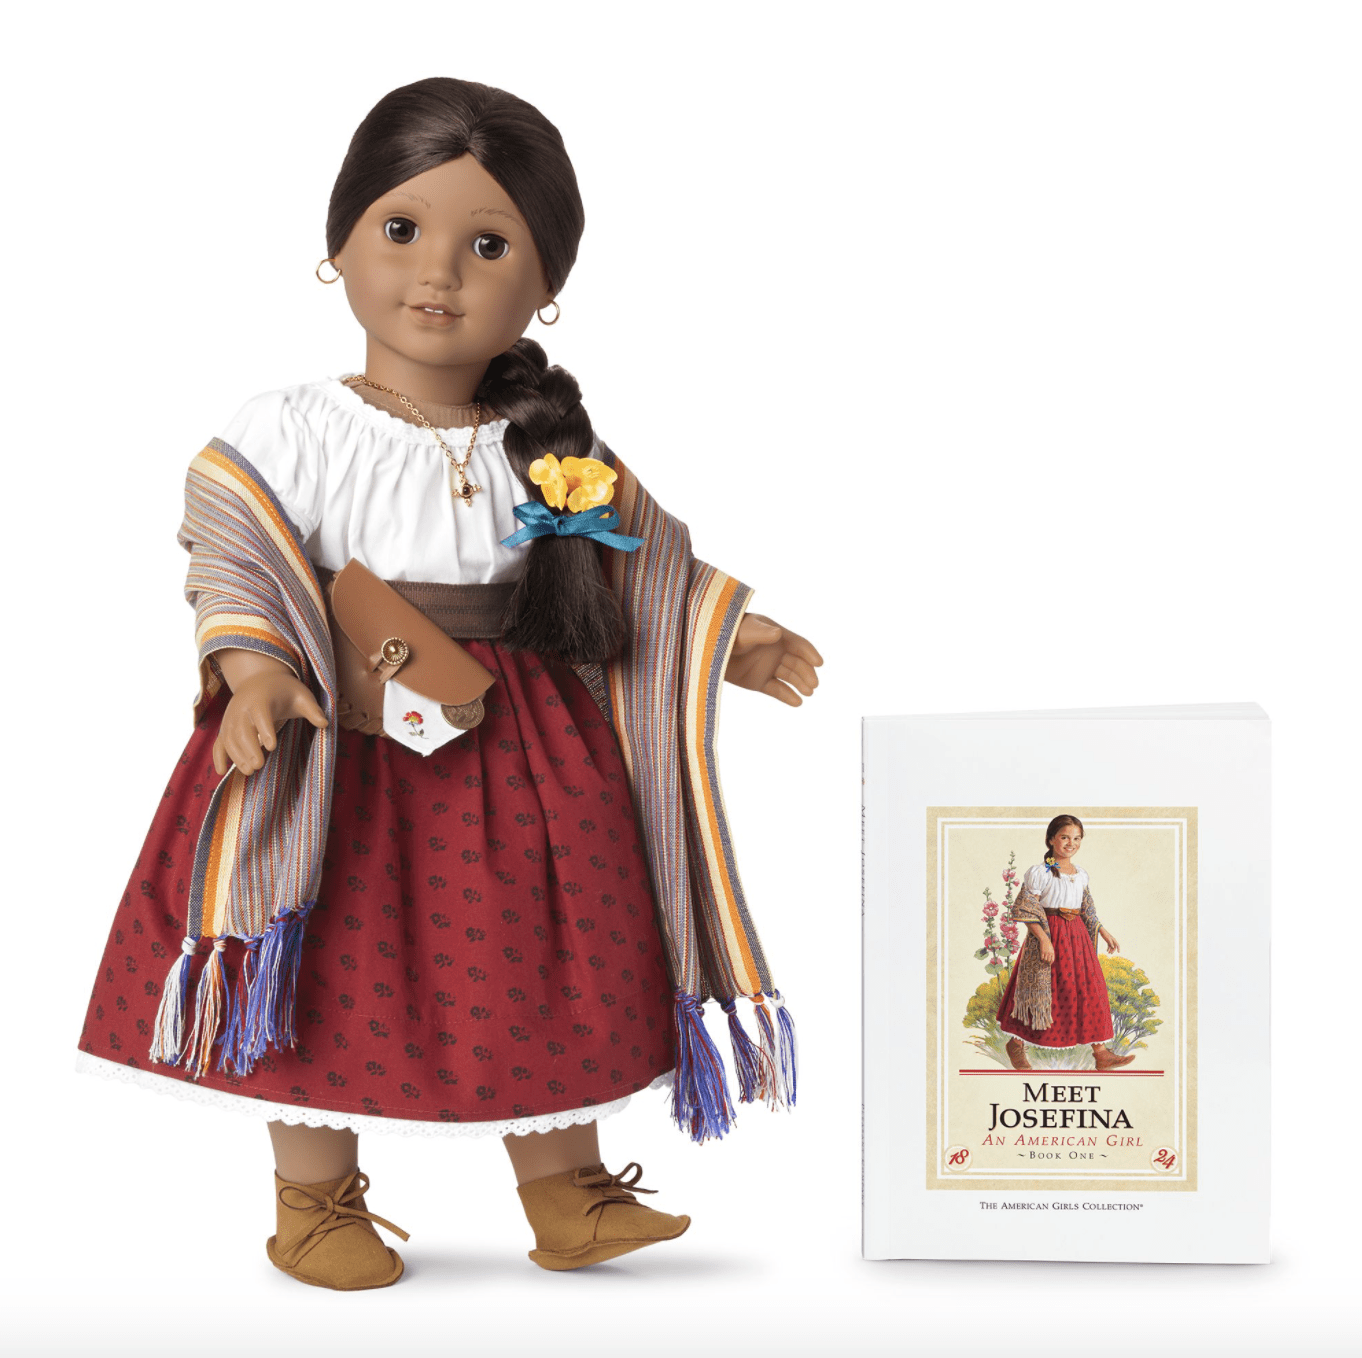 New American Girl Josefina's quill retired from Nighttime accessories for dolls